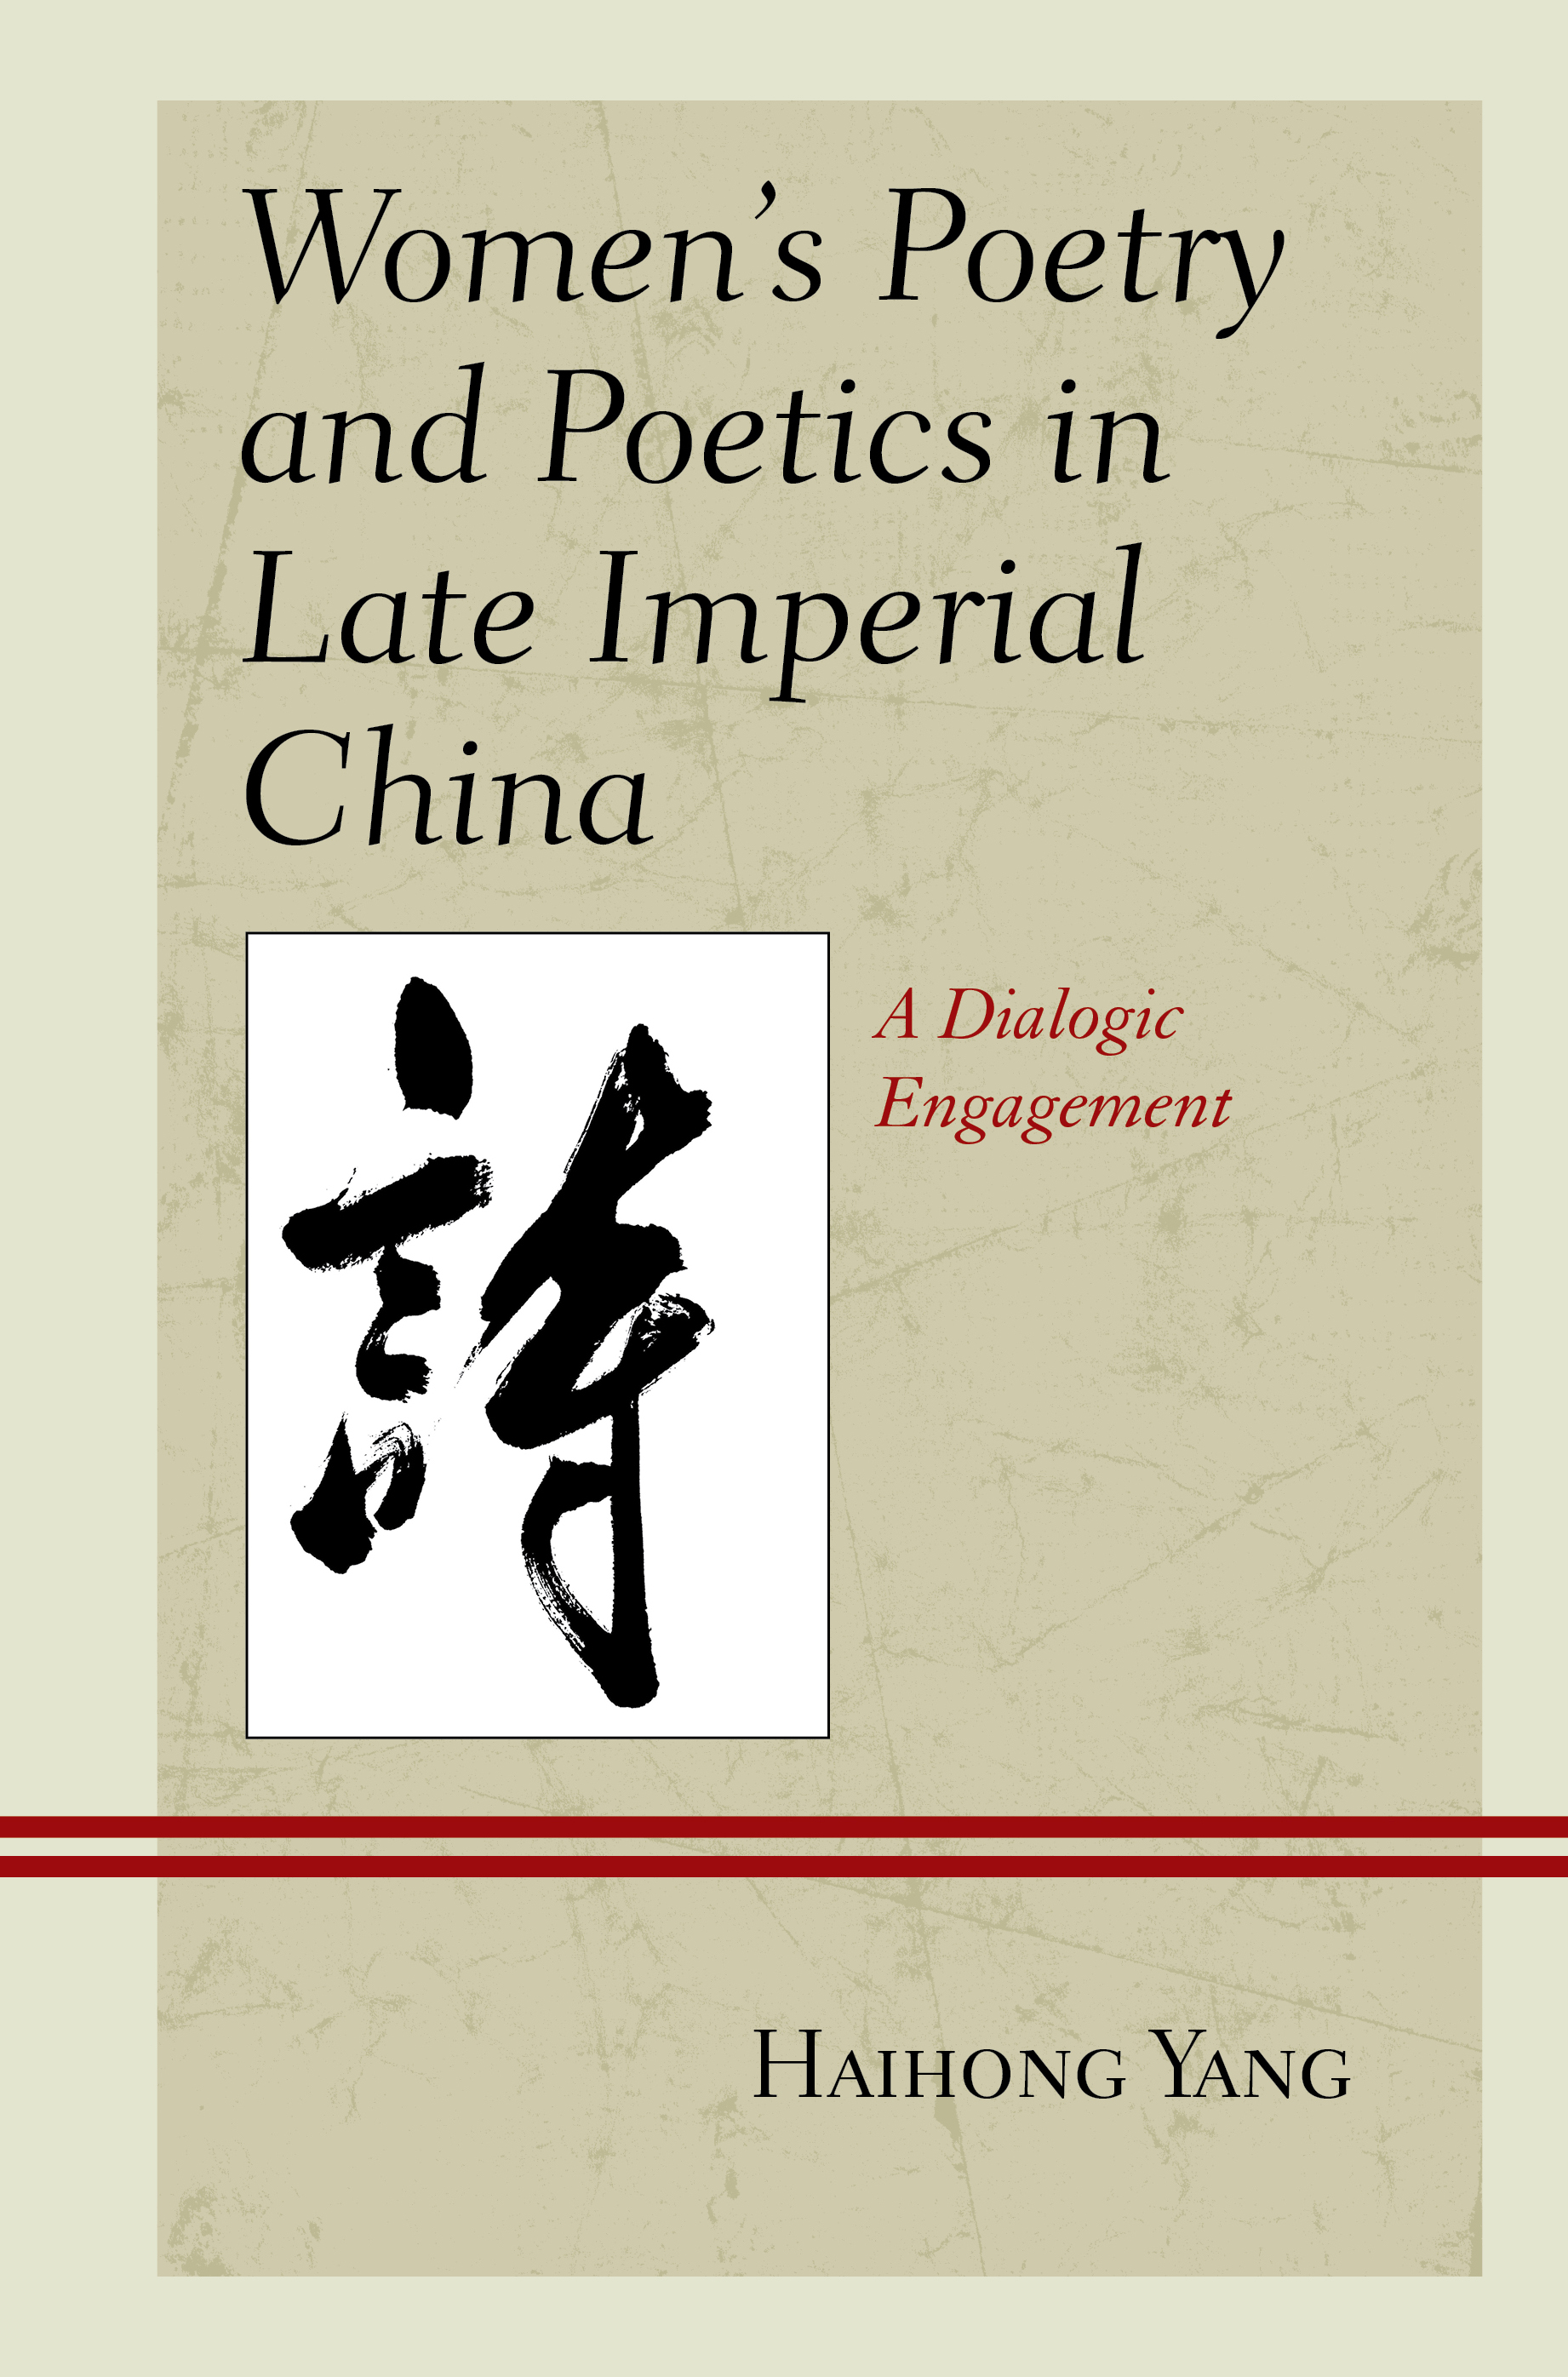 Women's Poetry and Poetics in Late Imperial China: A Dialogic Engagement